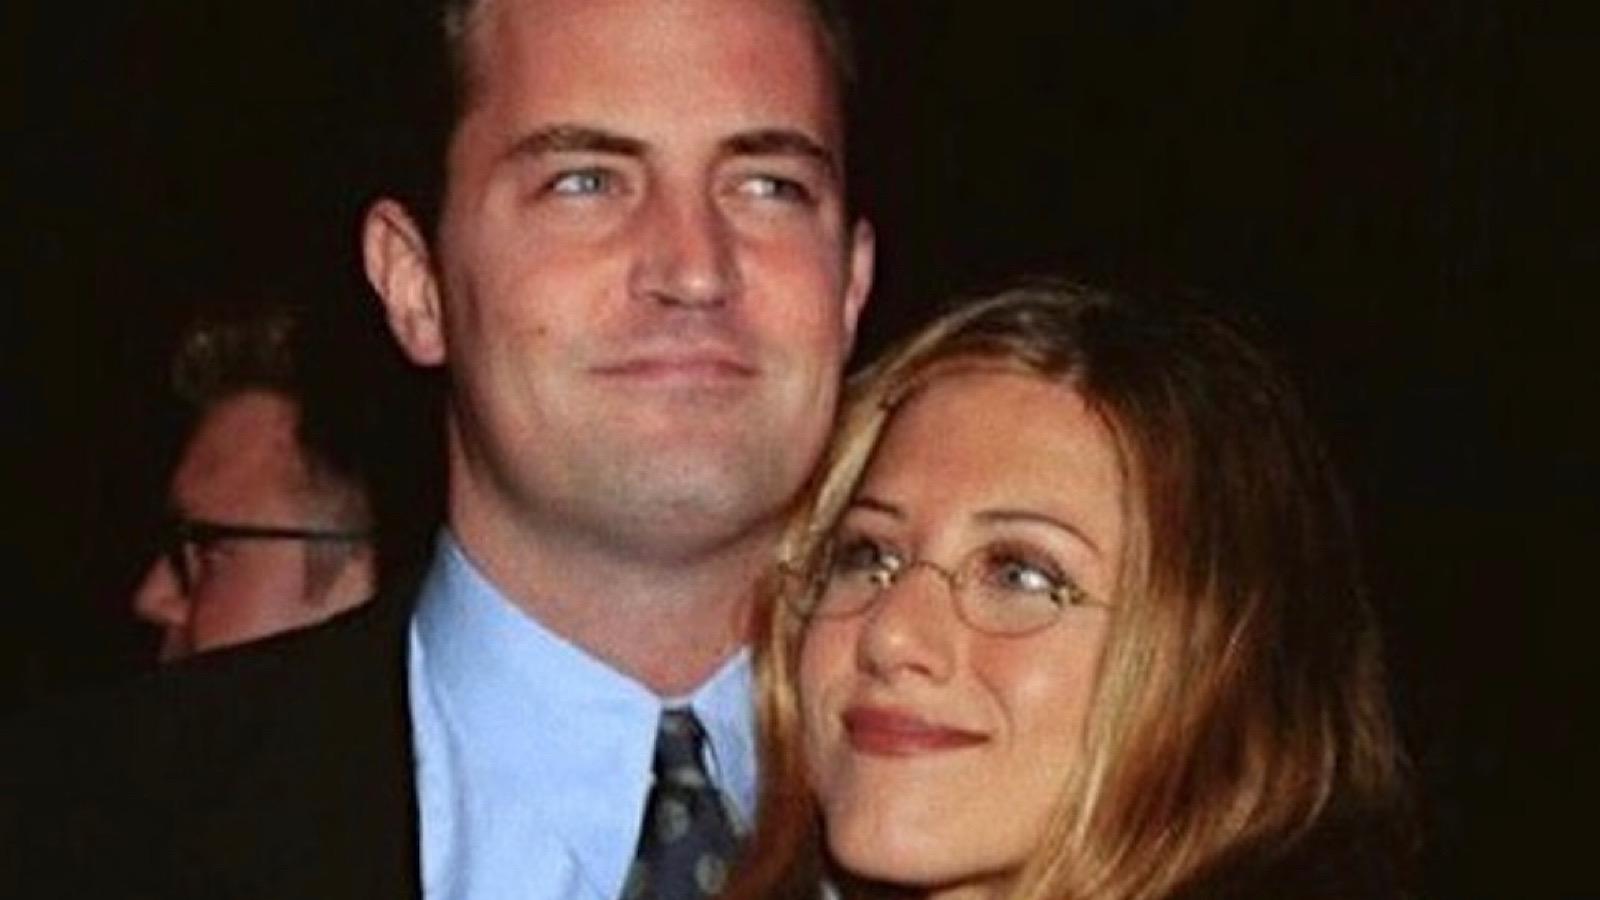 matthew perry said he had a crush on jennifer aniston before Friends aired